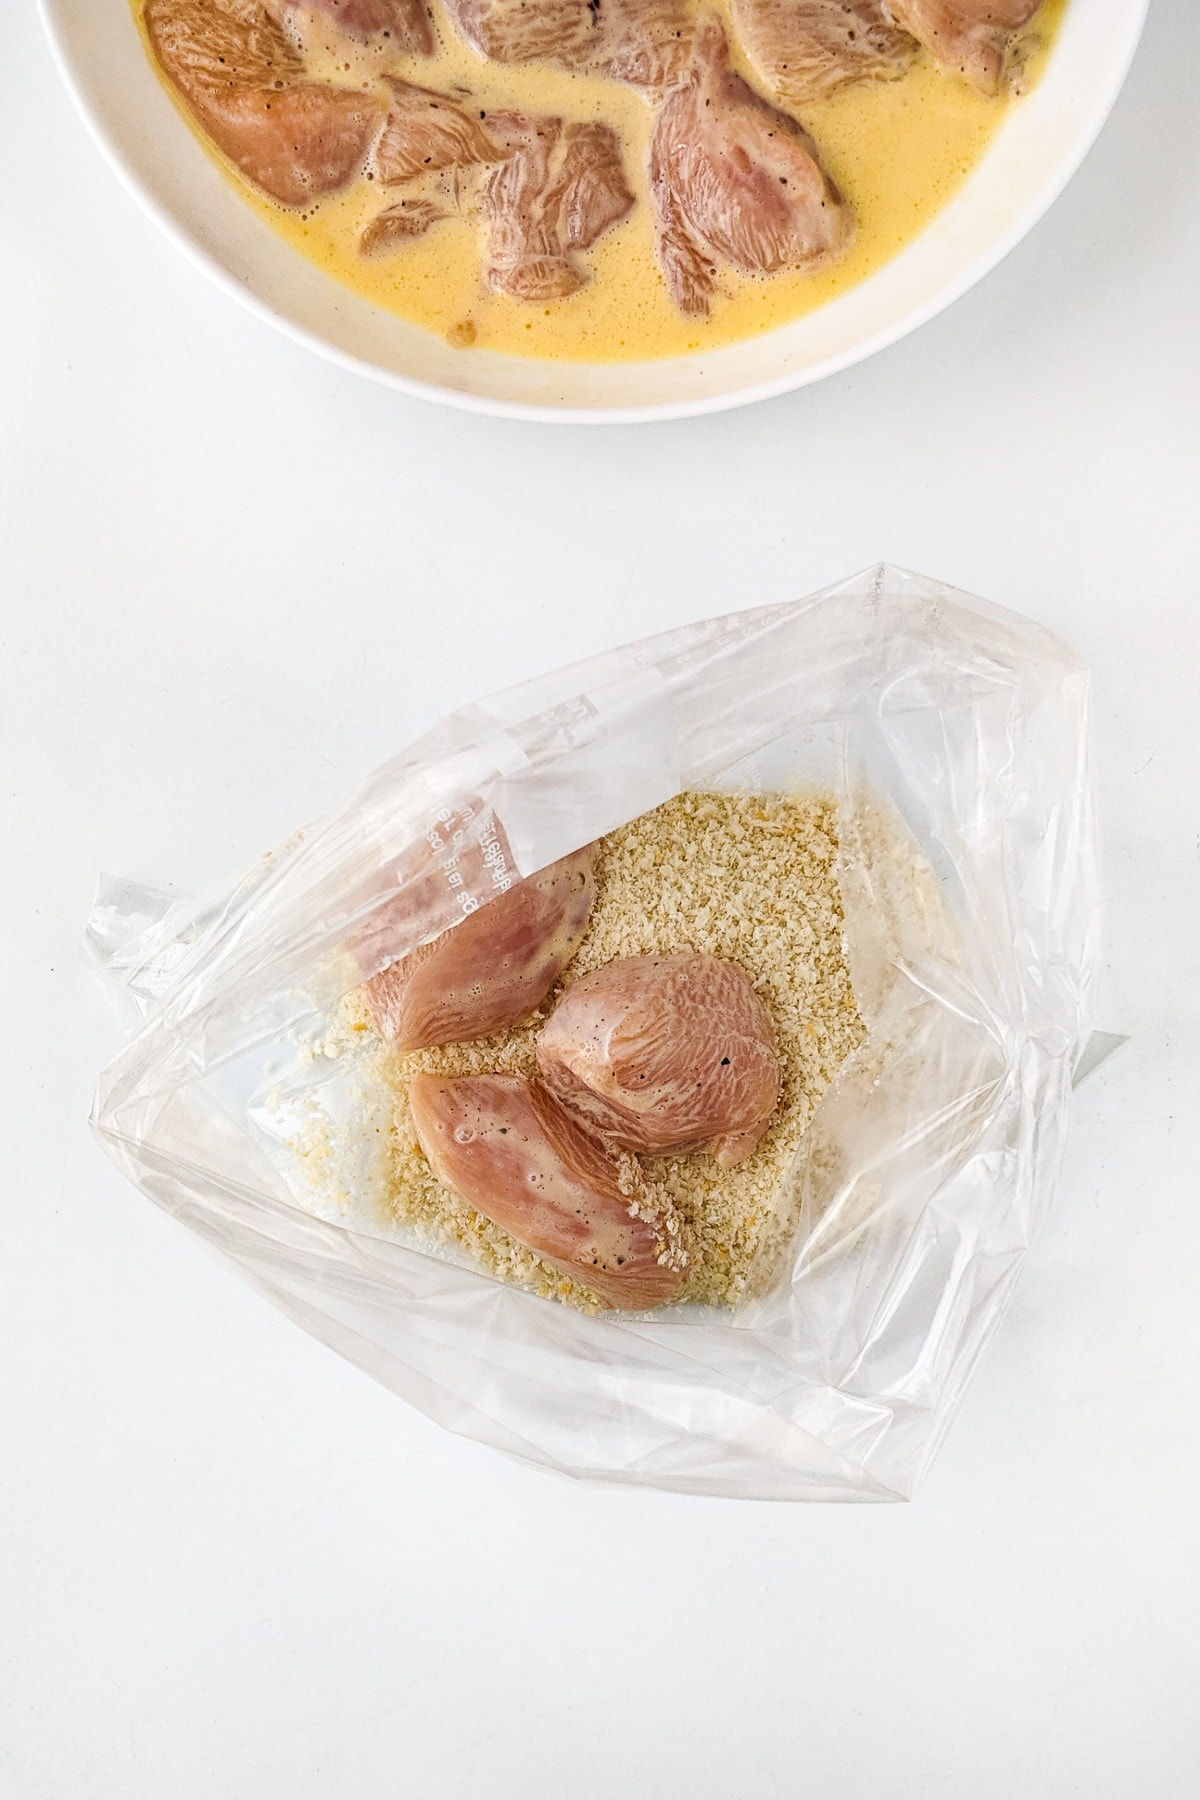 Three pieces of chicken in a plastic bag with panko.